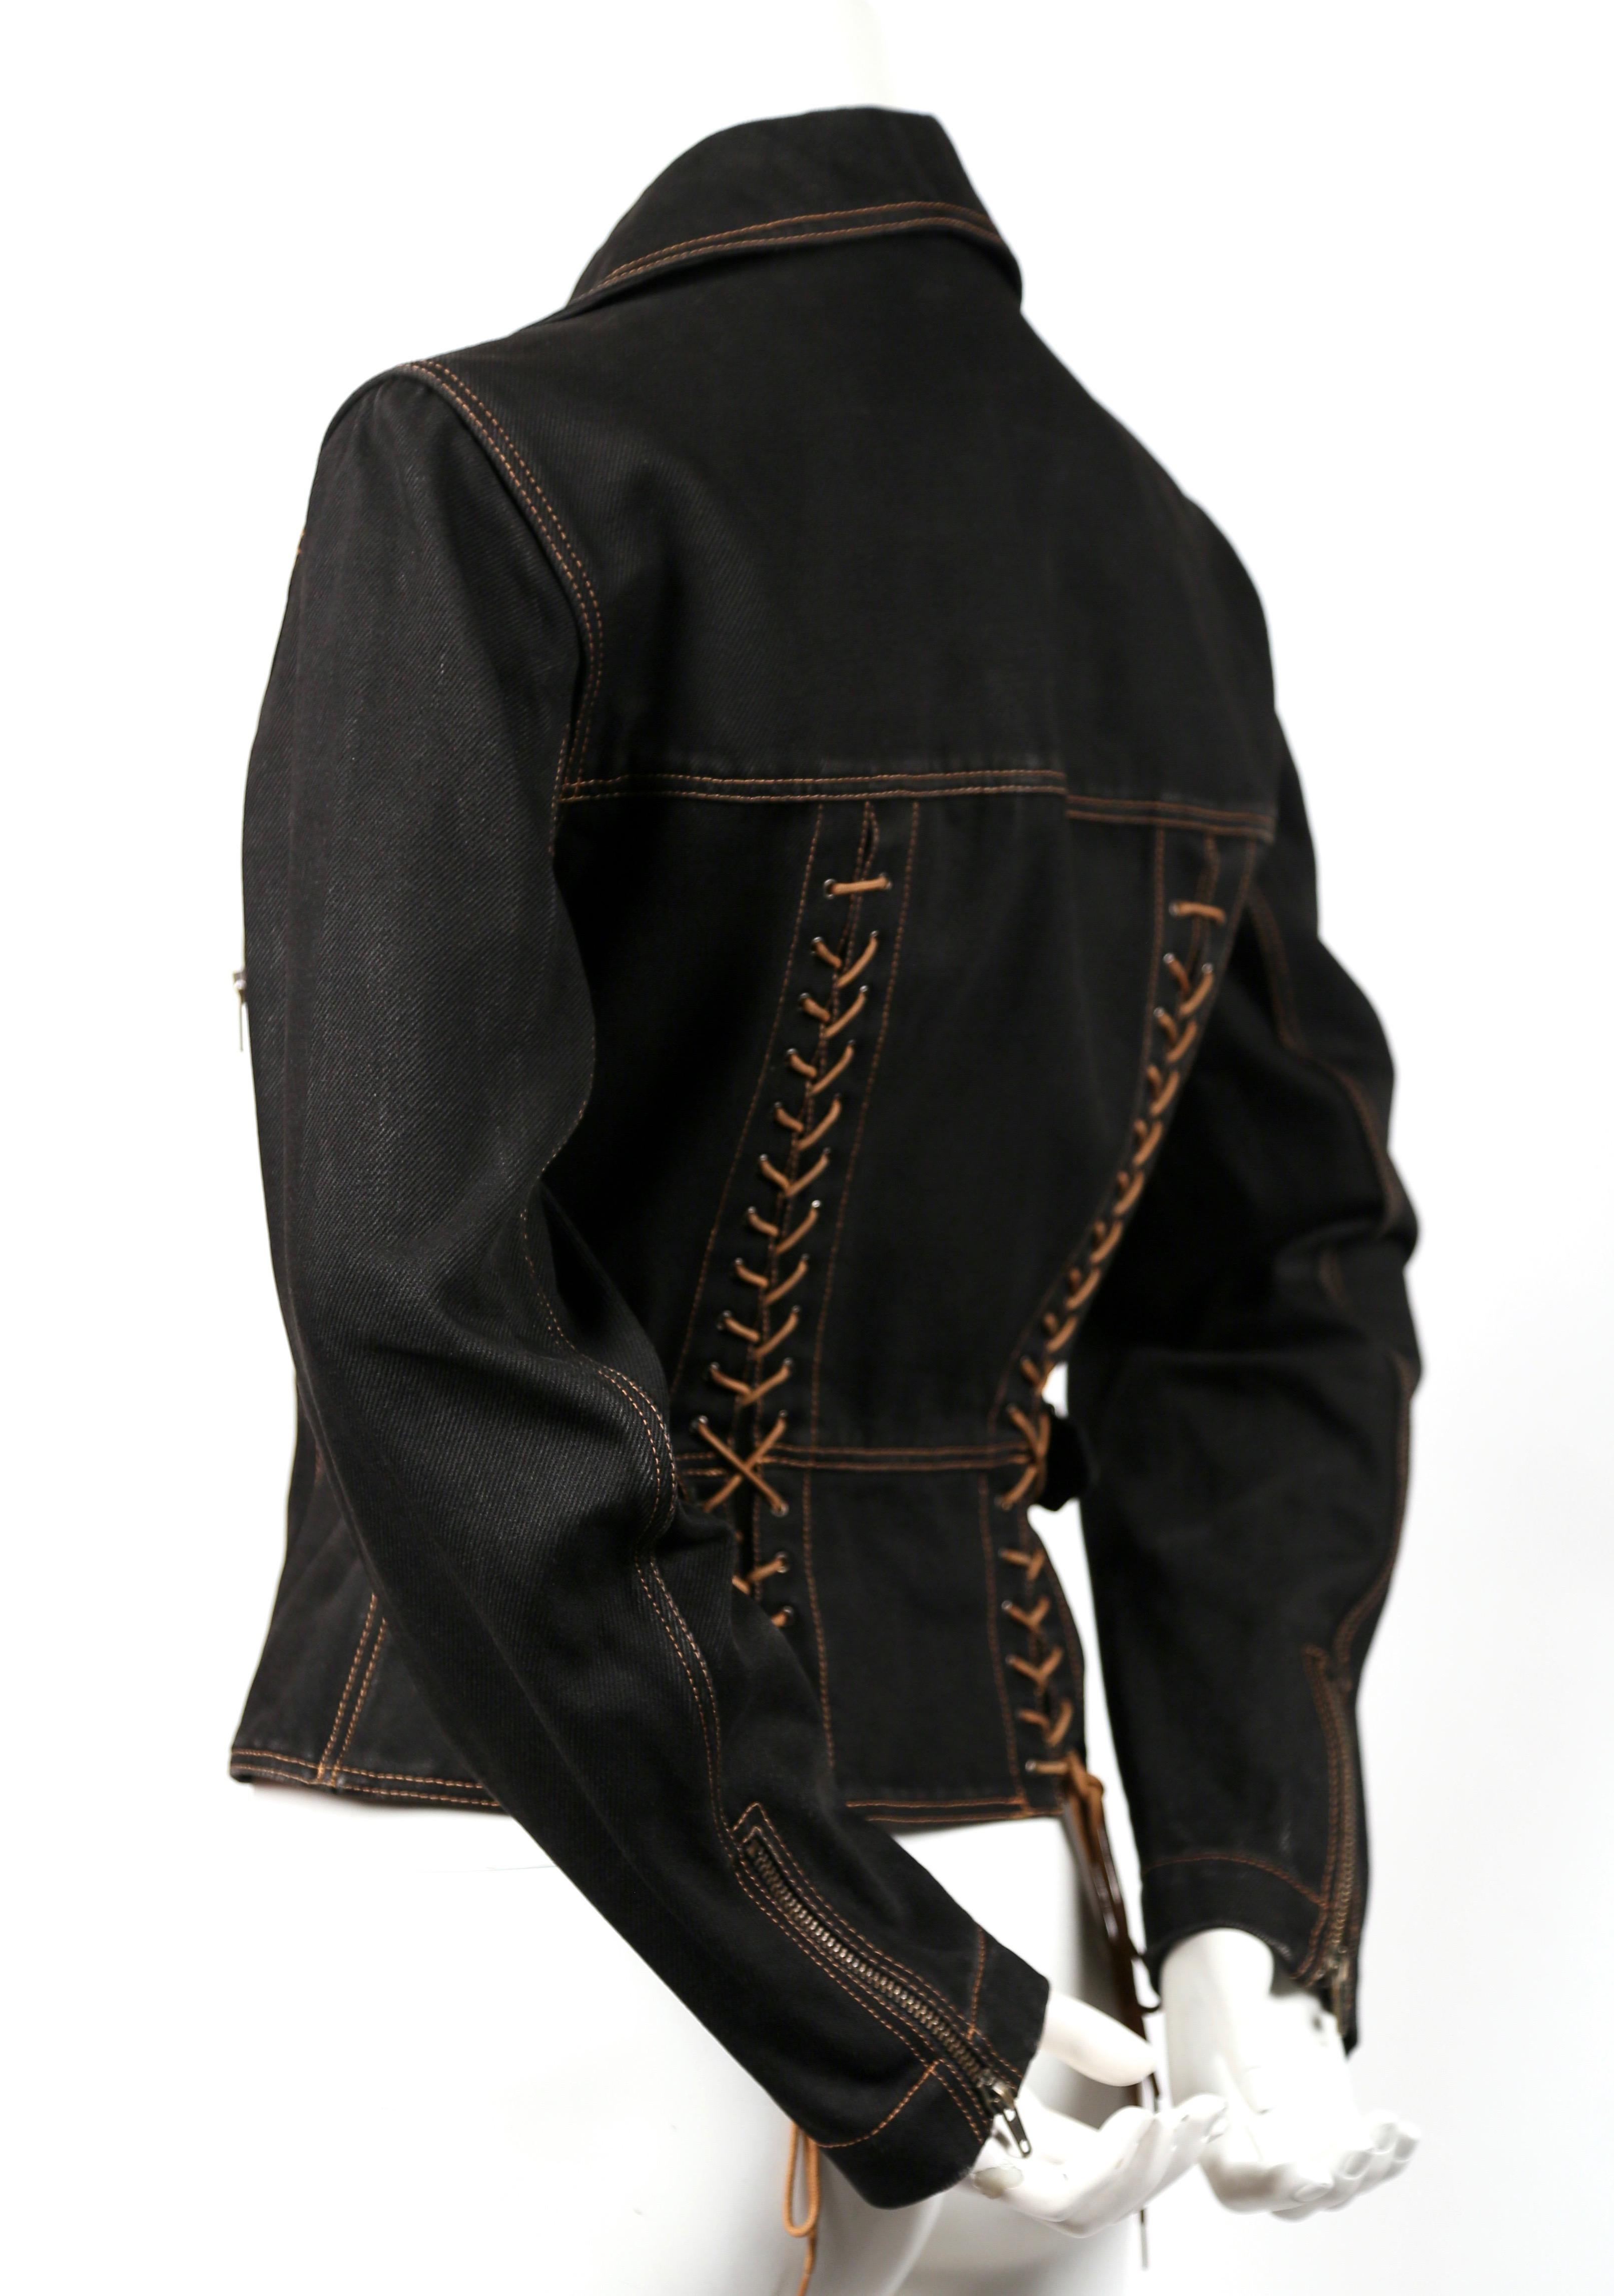 Women's or Men's 1991 AZZEDINE ALAIA black denim motorcycle jacket with corset laced back